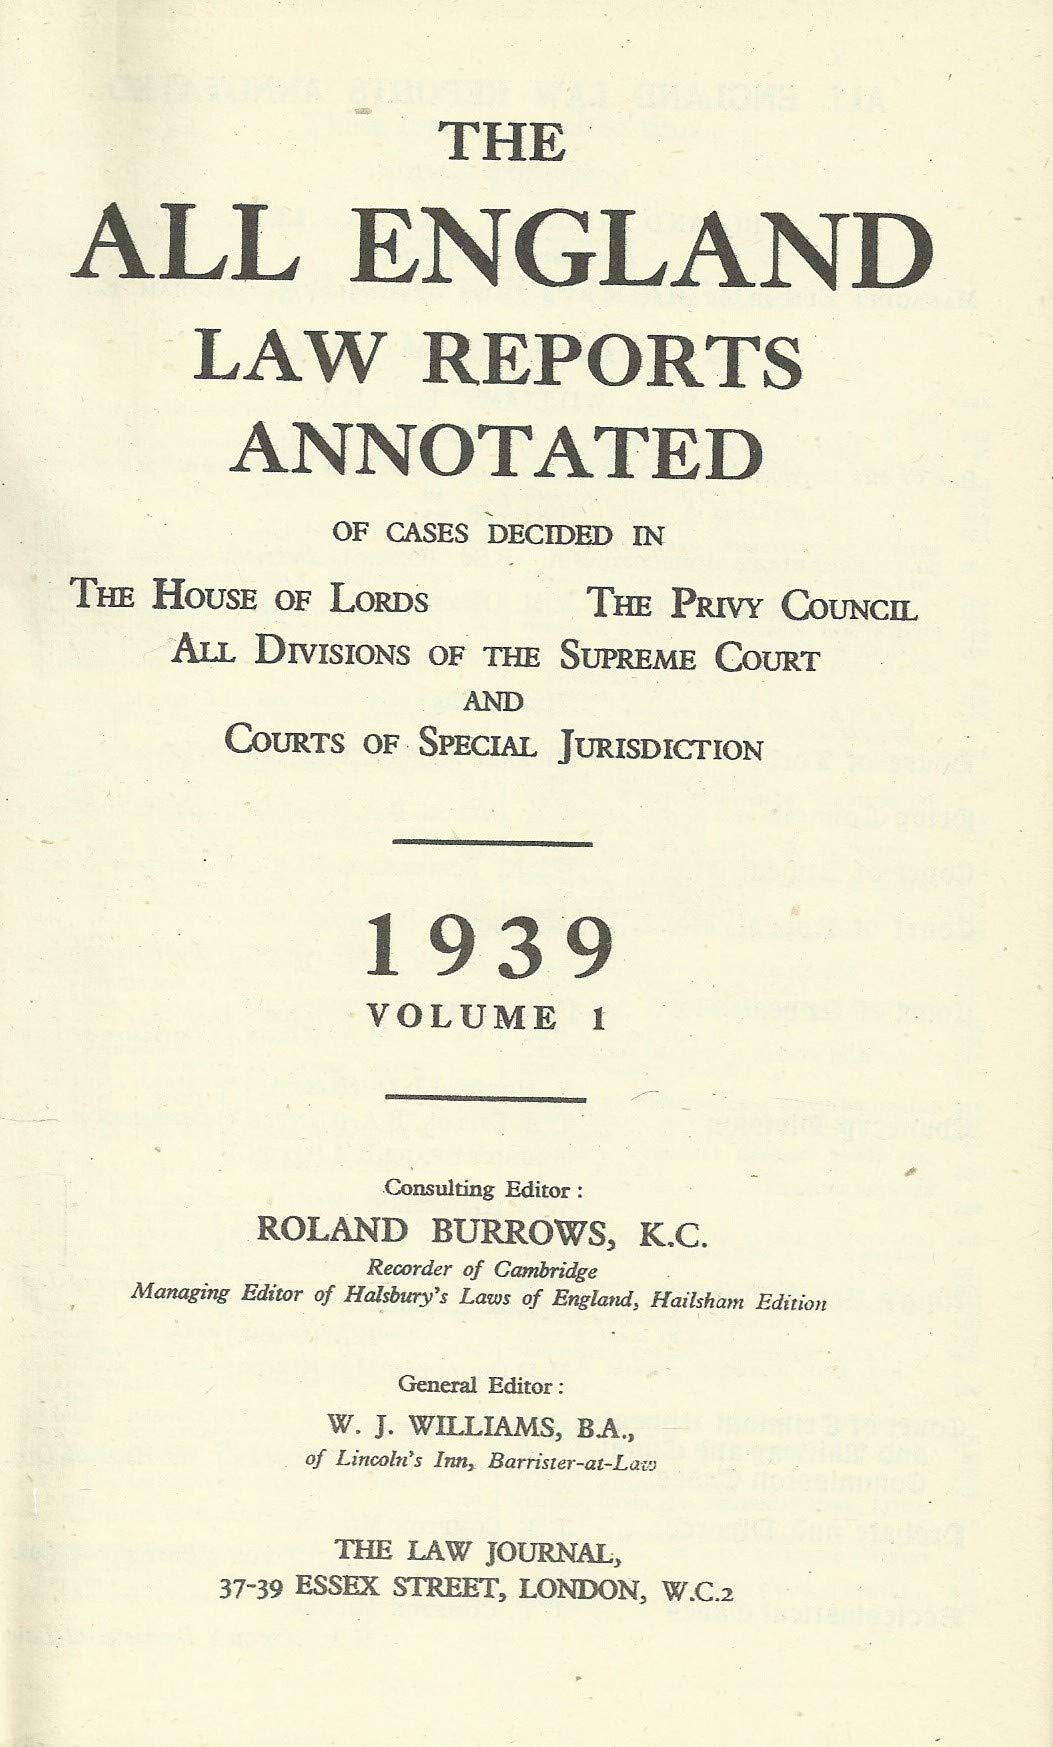 The All England Law Reports 1939, Volume 1